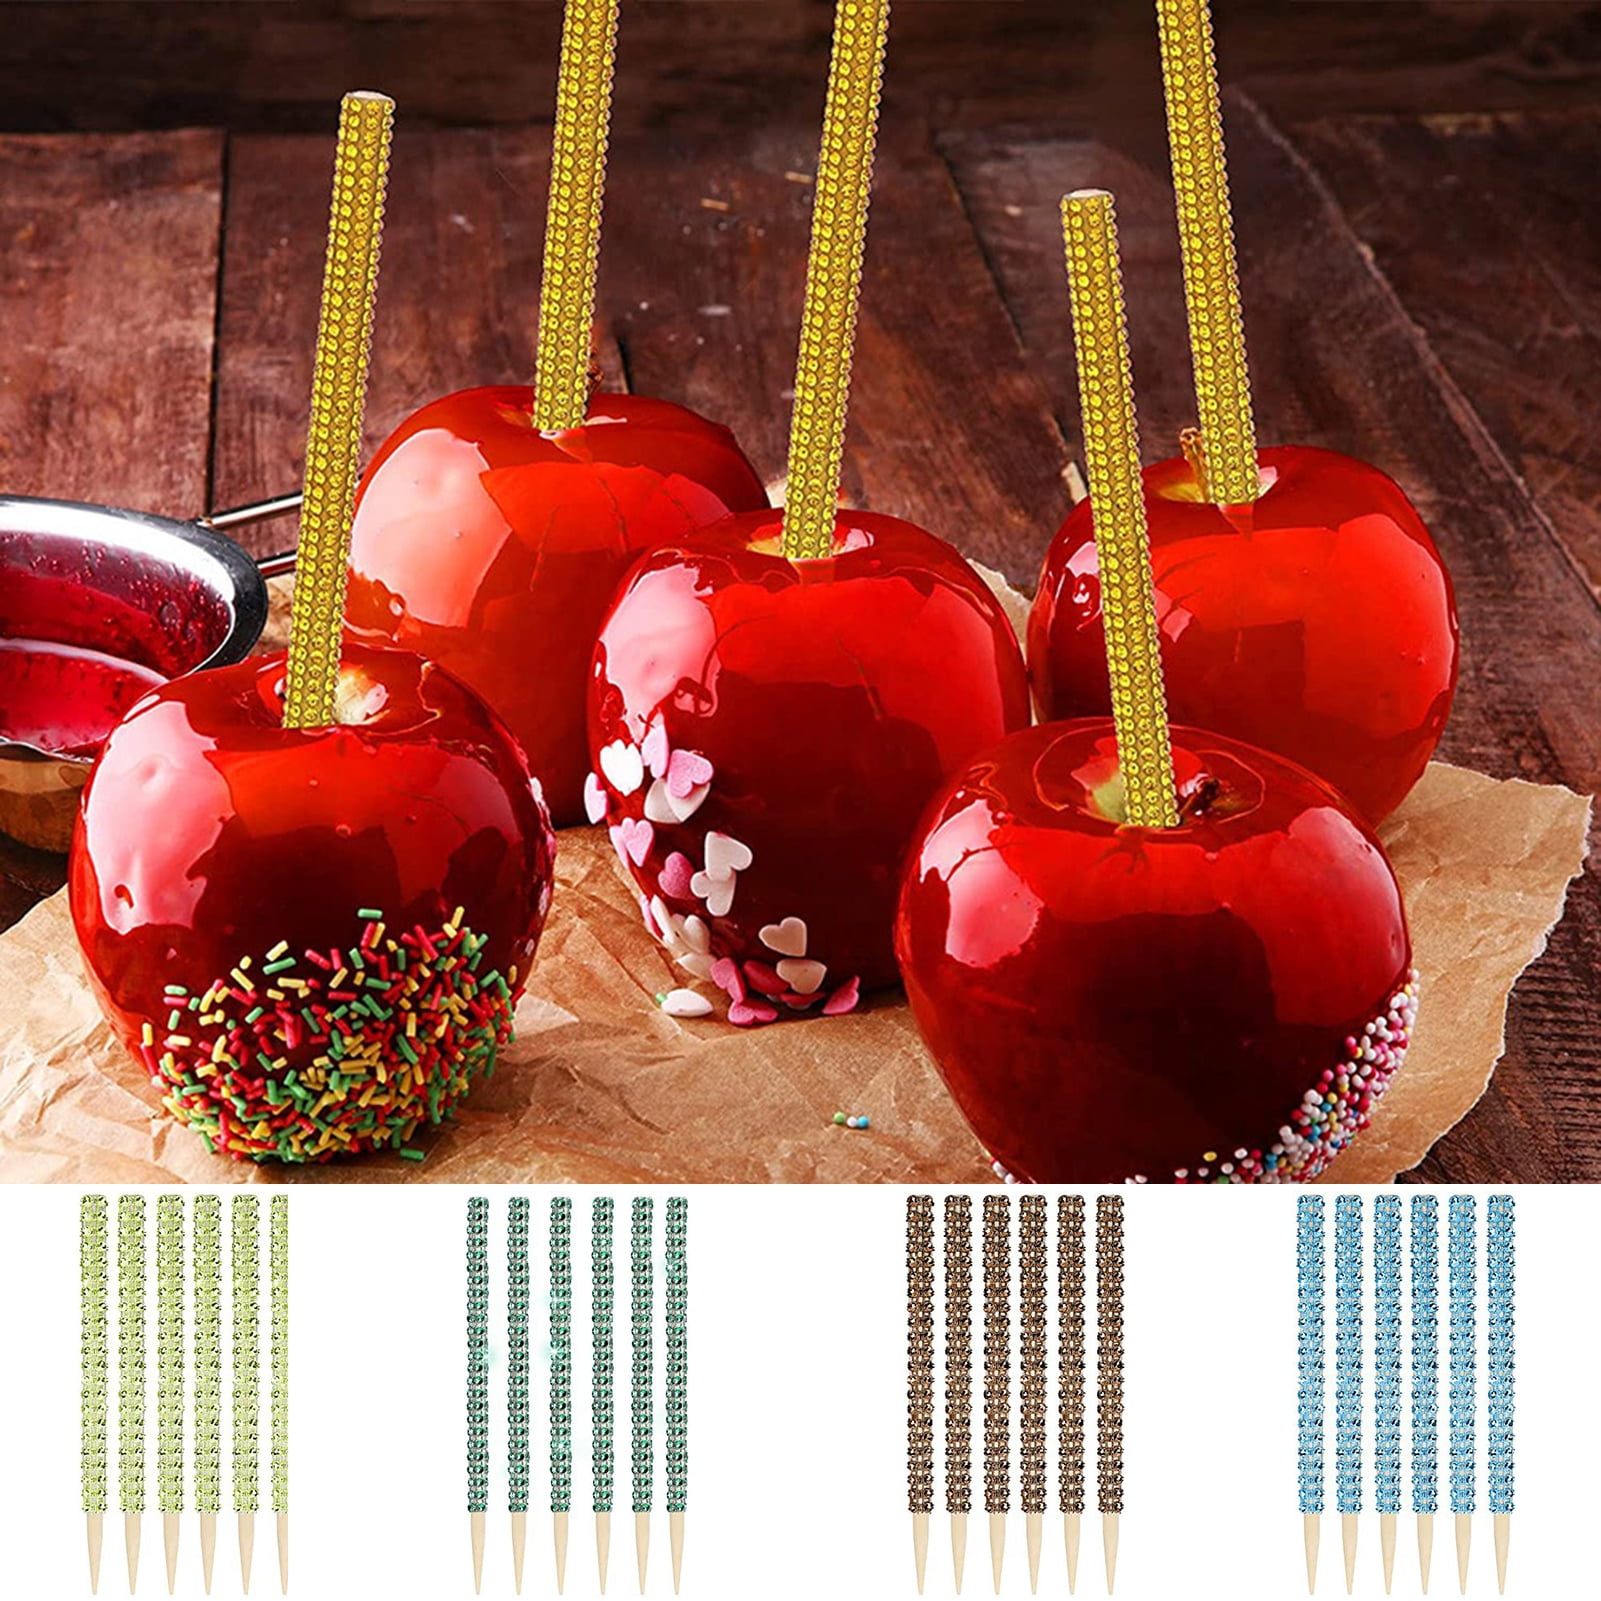 20pcs/pack Wood Candy Apple Stick Cake Sticks Toppers Buffet